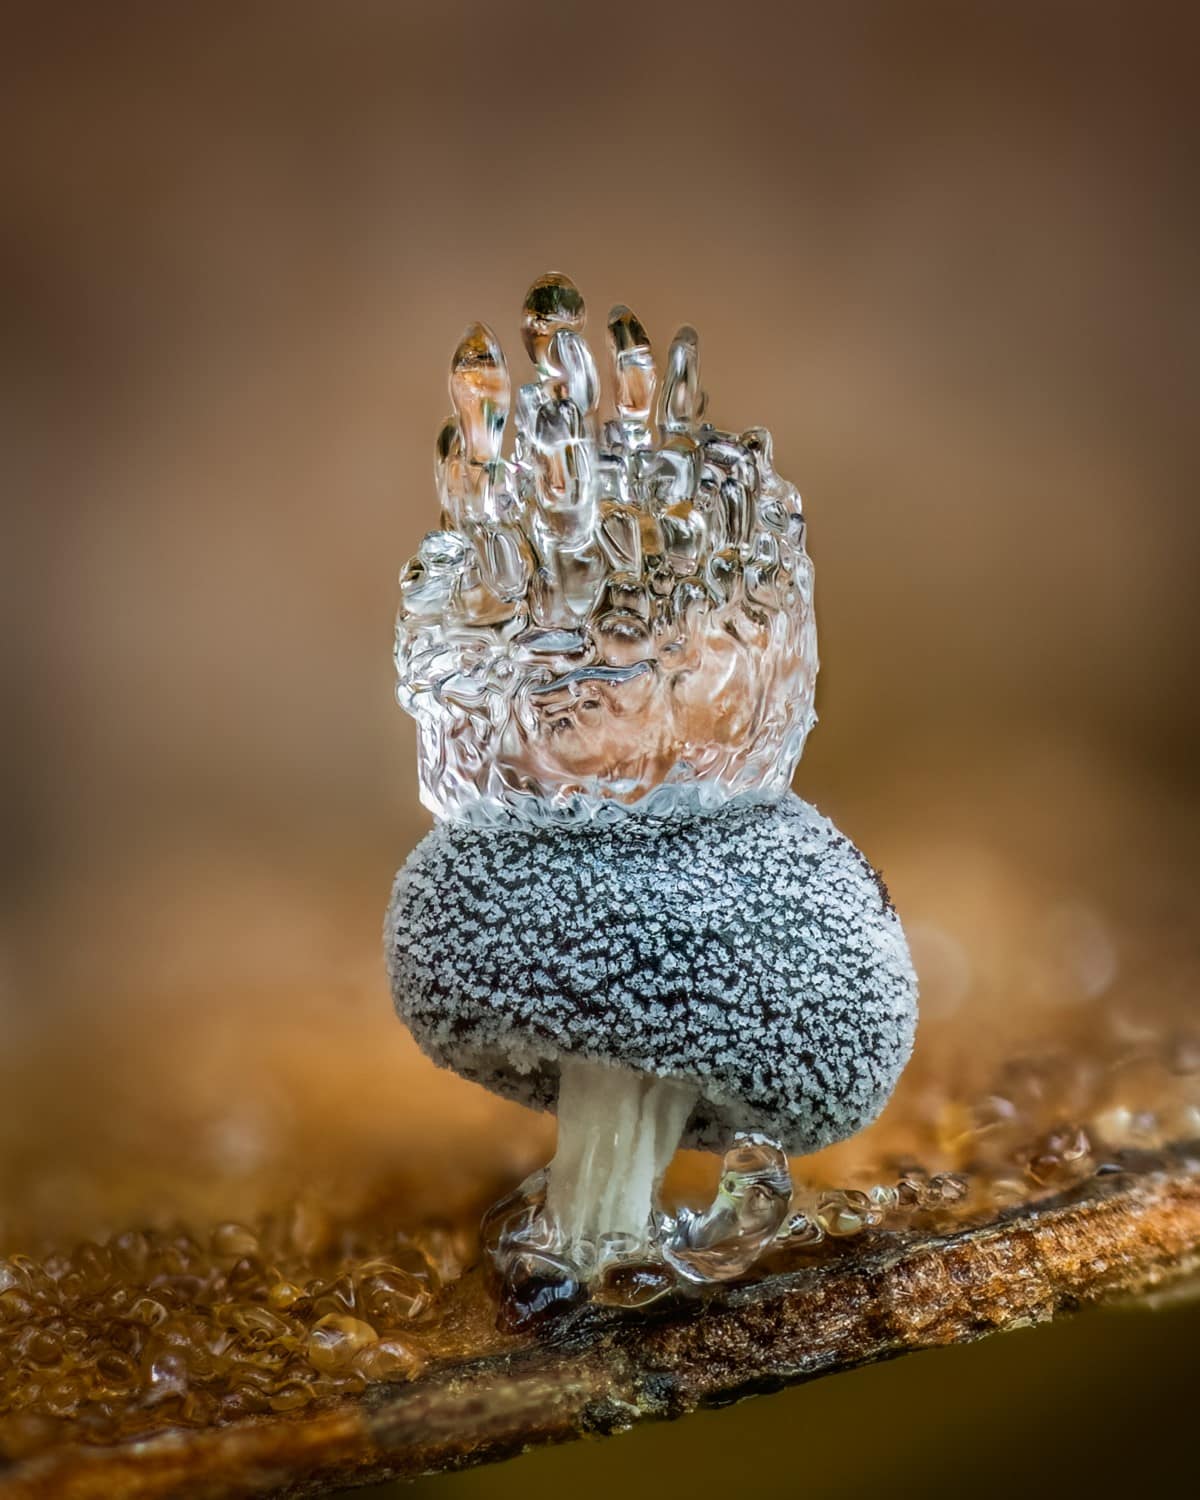 A tiny slime mould (Didymium squamulosum) proudly wears a crown of ice.